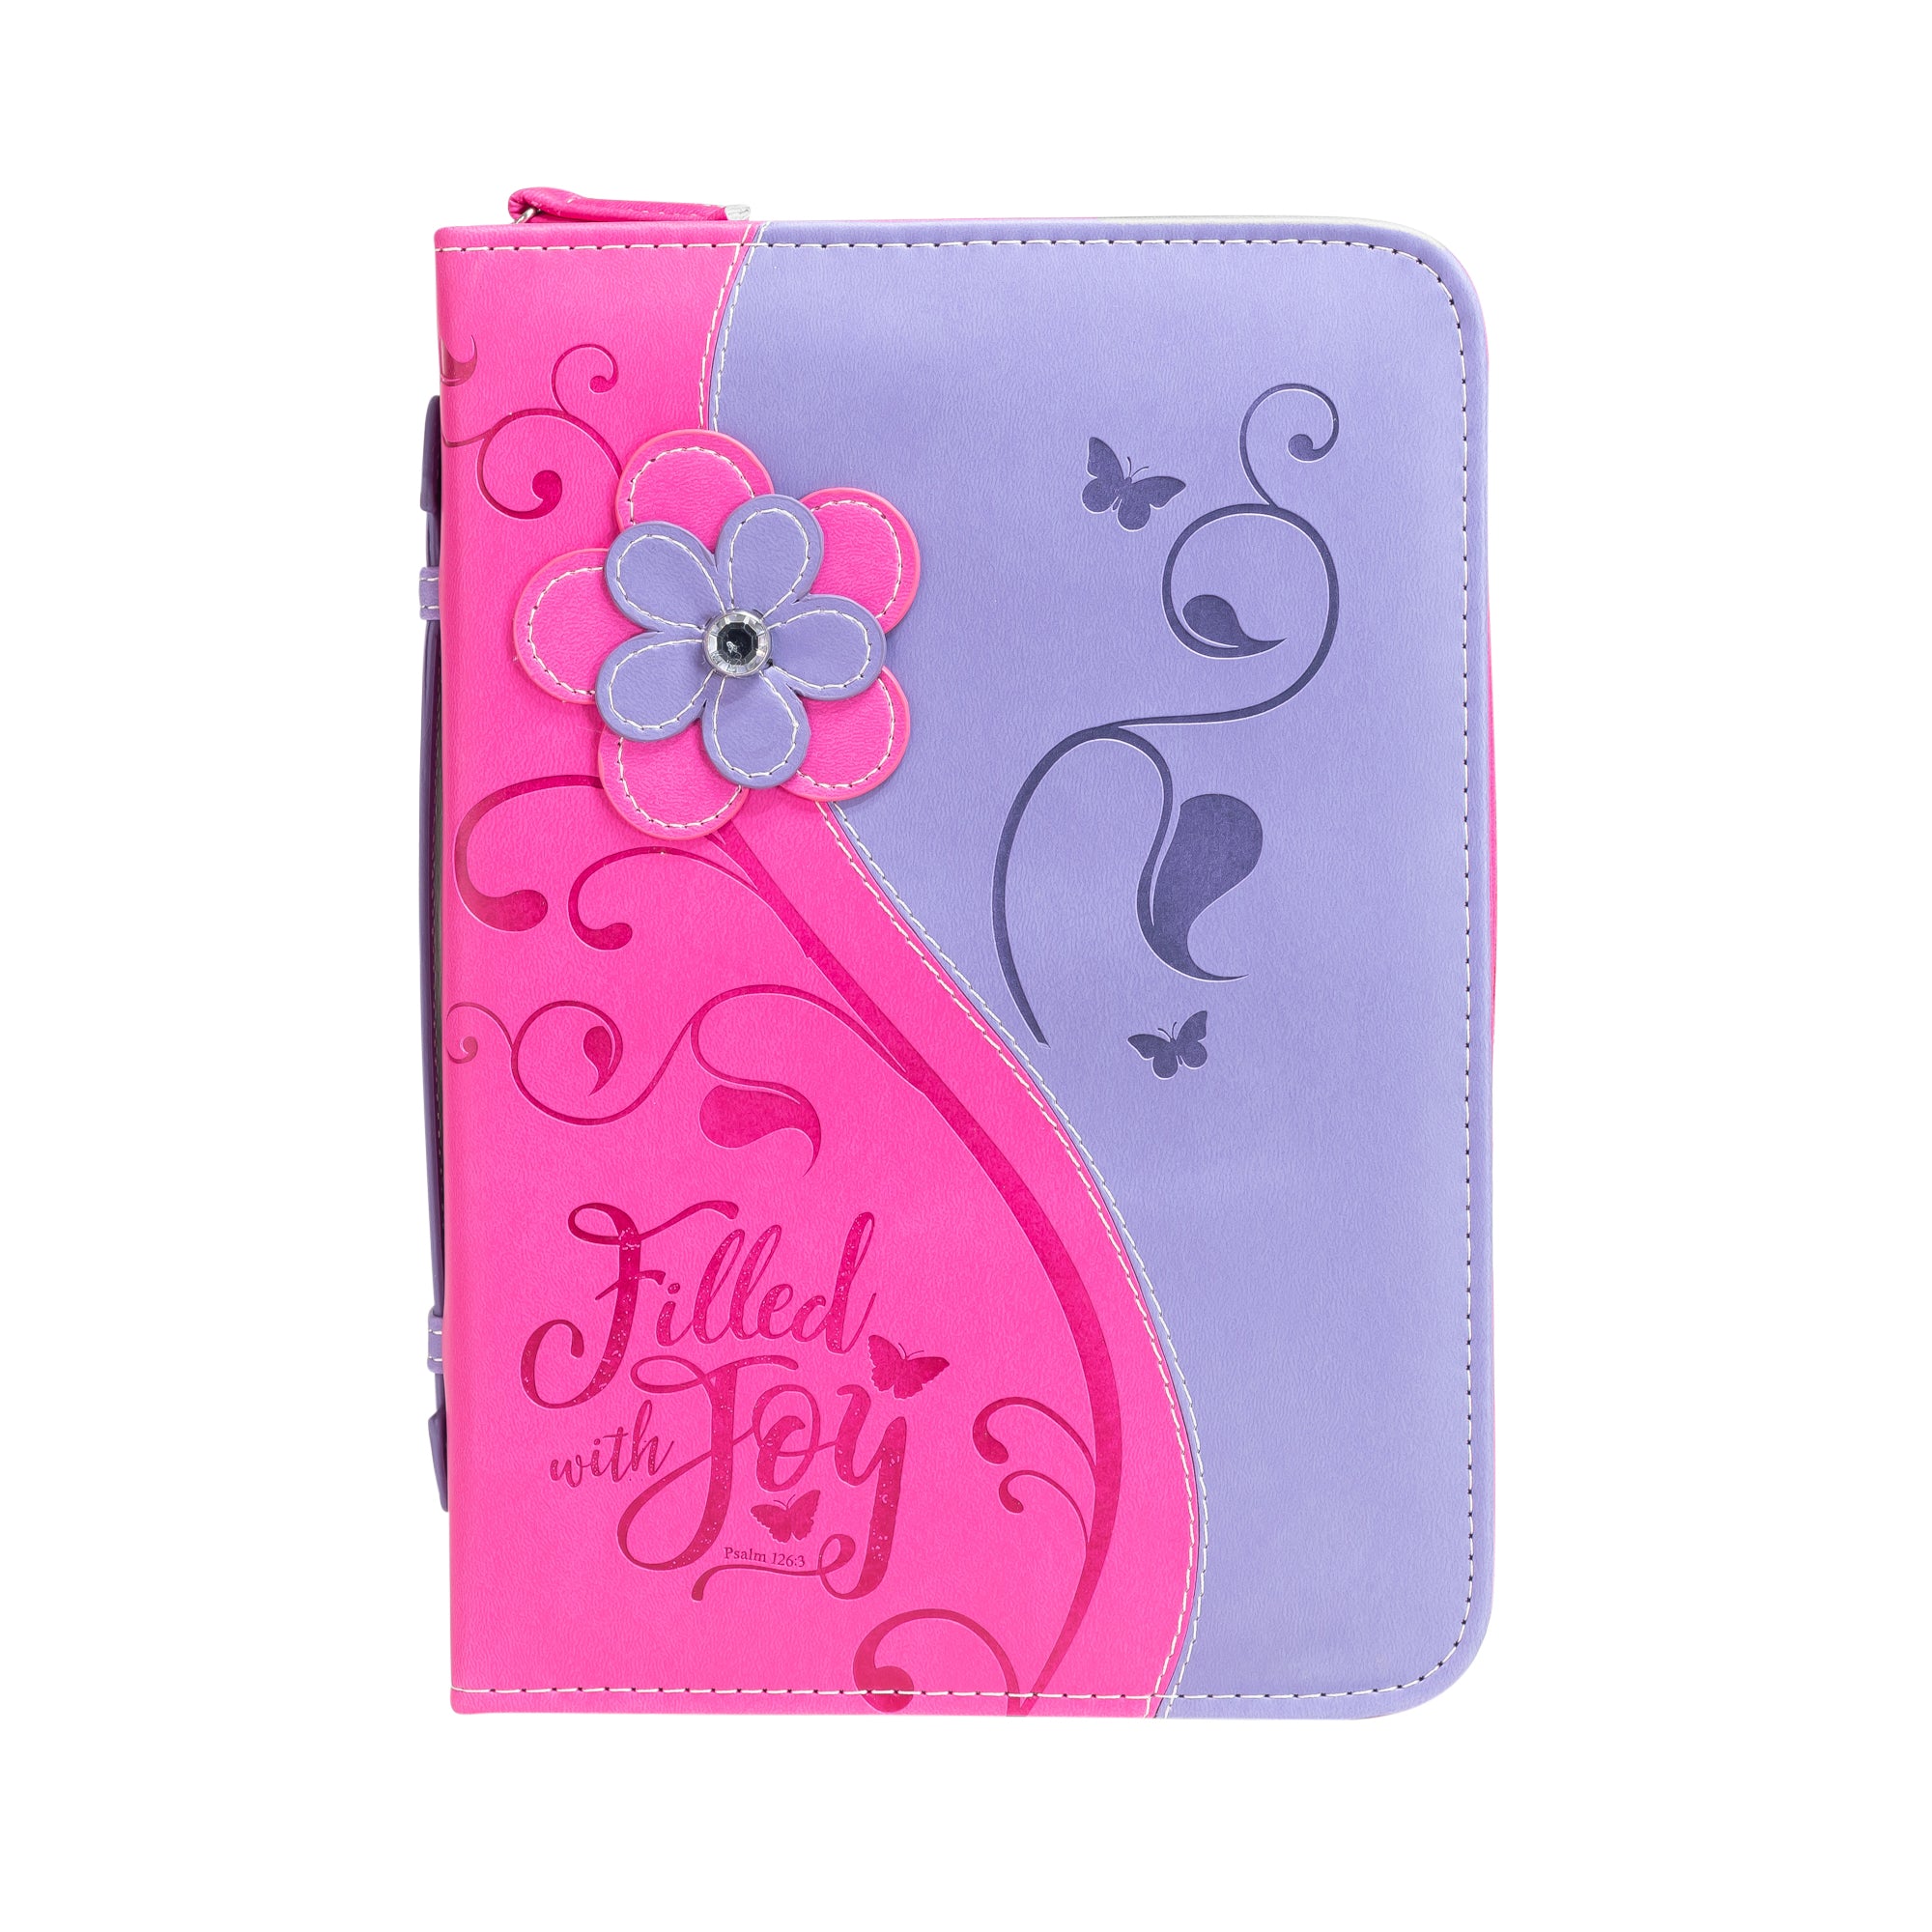 Divine Details: Bible Cover Pink - Daisy Filled W/Joy